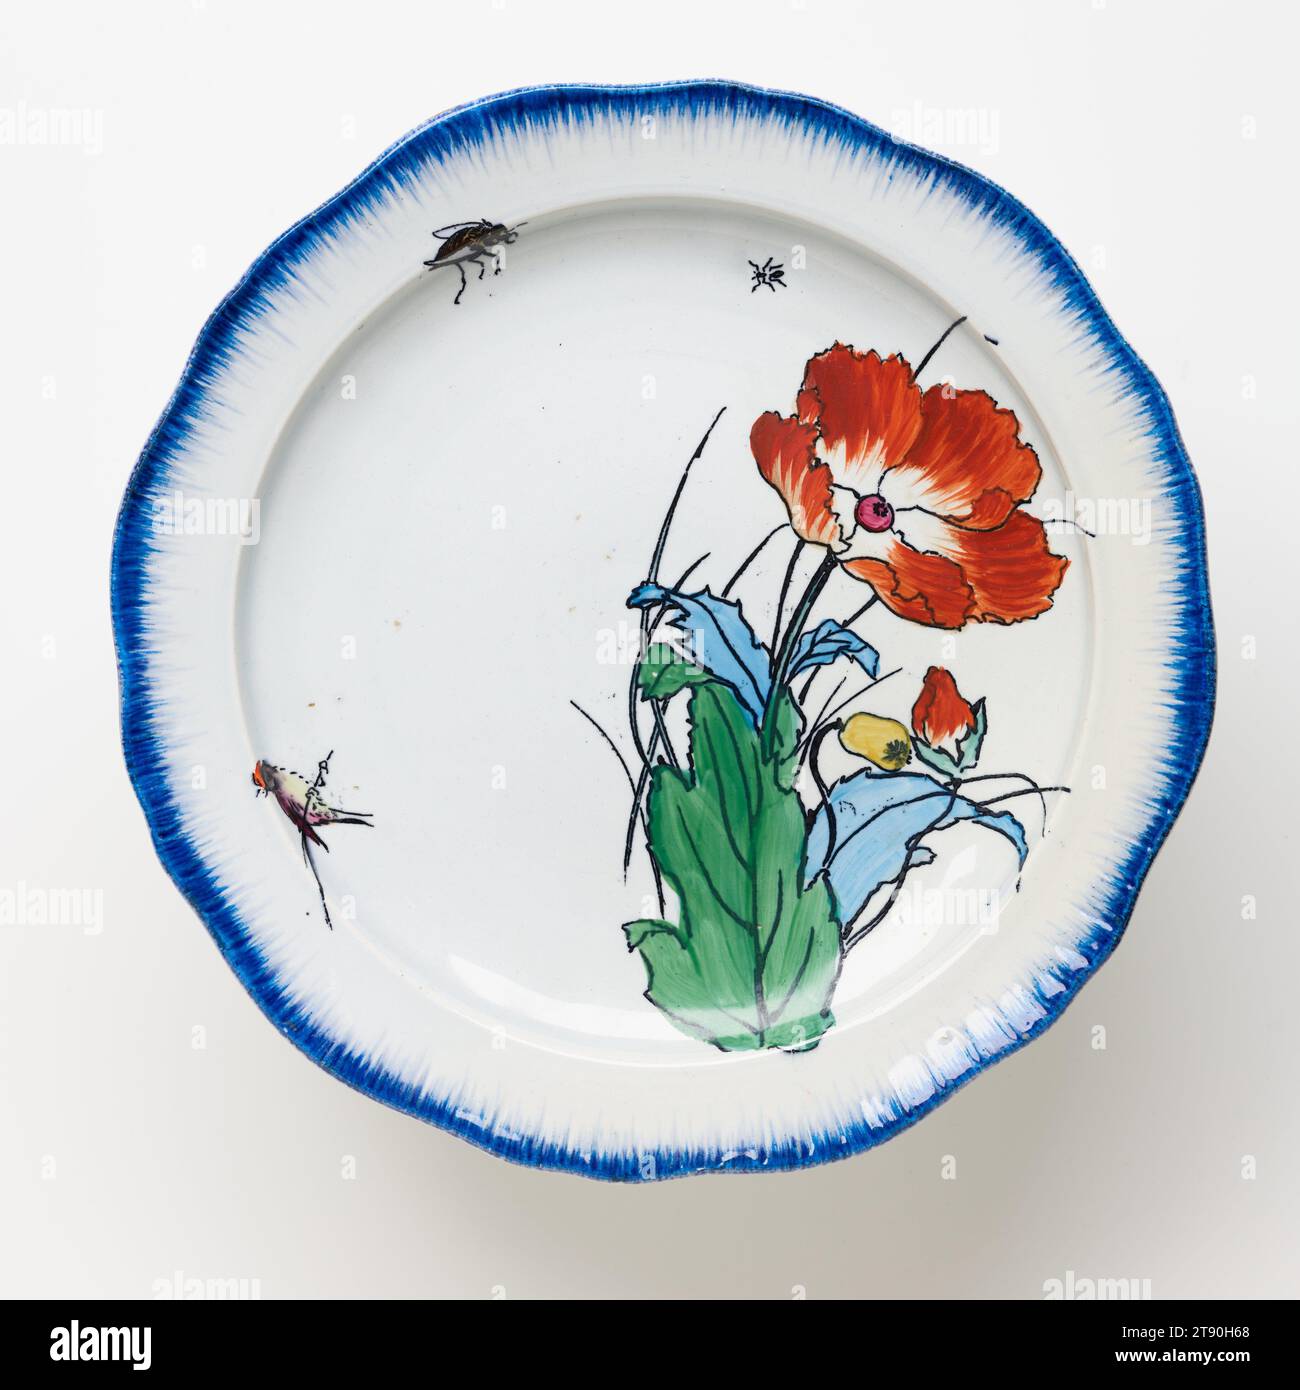 Cake plate with poppy, 1866-1867, Félix Bracquemond; Manufacturer: Lebeuf, Milliet & Co., Creil; Retailer: Francois-Eugene Rousseau, French, 1833–1914, 3 × 8 3/4 in. (7.62 × 22.23 cm), Lead-glazed earthenware, transfer printing, France, 19th century, This platter and three footed plates come from a large table service commissioned by the French dealer and publisher Eugène Rousseau (1827-1890) and designed by the painter and print maker Felix Bracquemond. First exhibited in Paris at the Universal Exhibition in 1867 and considered to be the earliest example of French ceramics Stock Photo